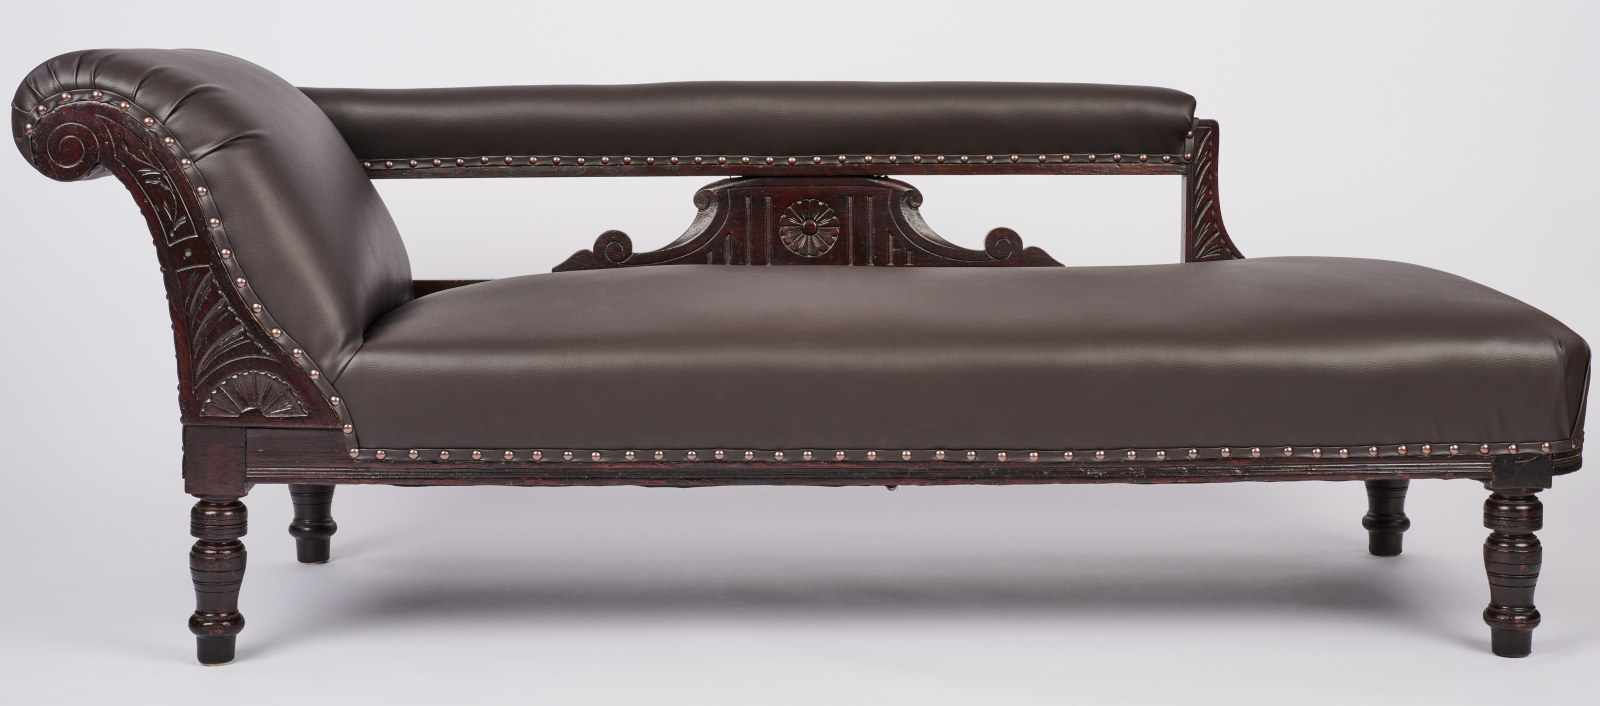 Chaise longue with scroll end, maker unknown, circa 1910s, timber and textile